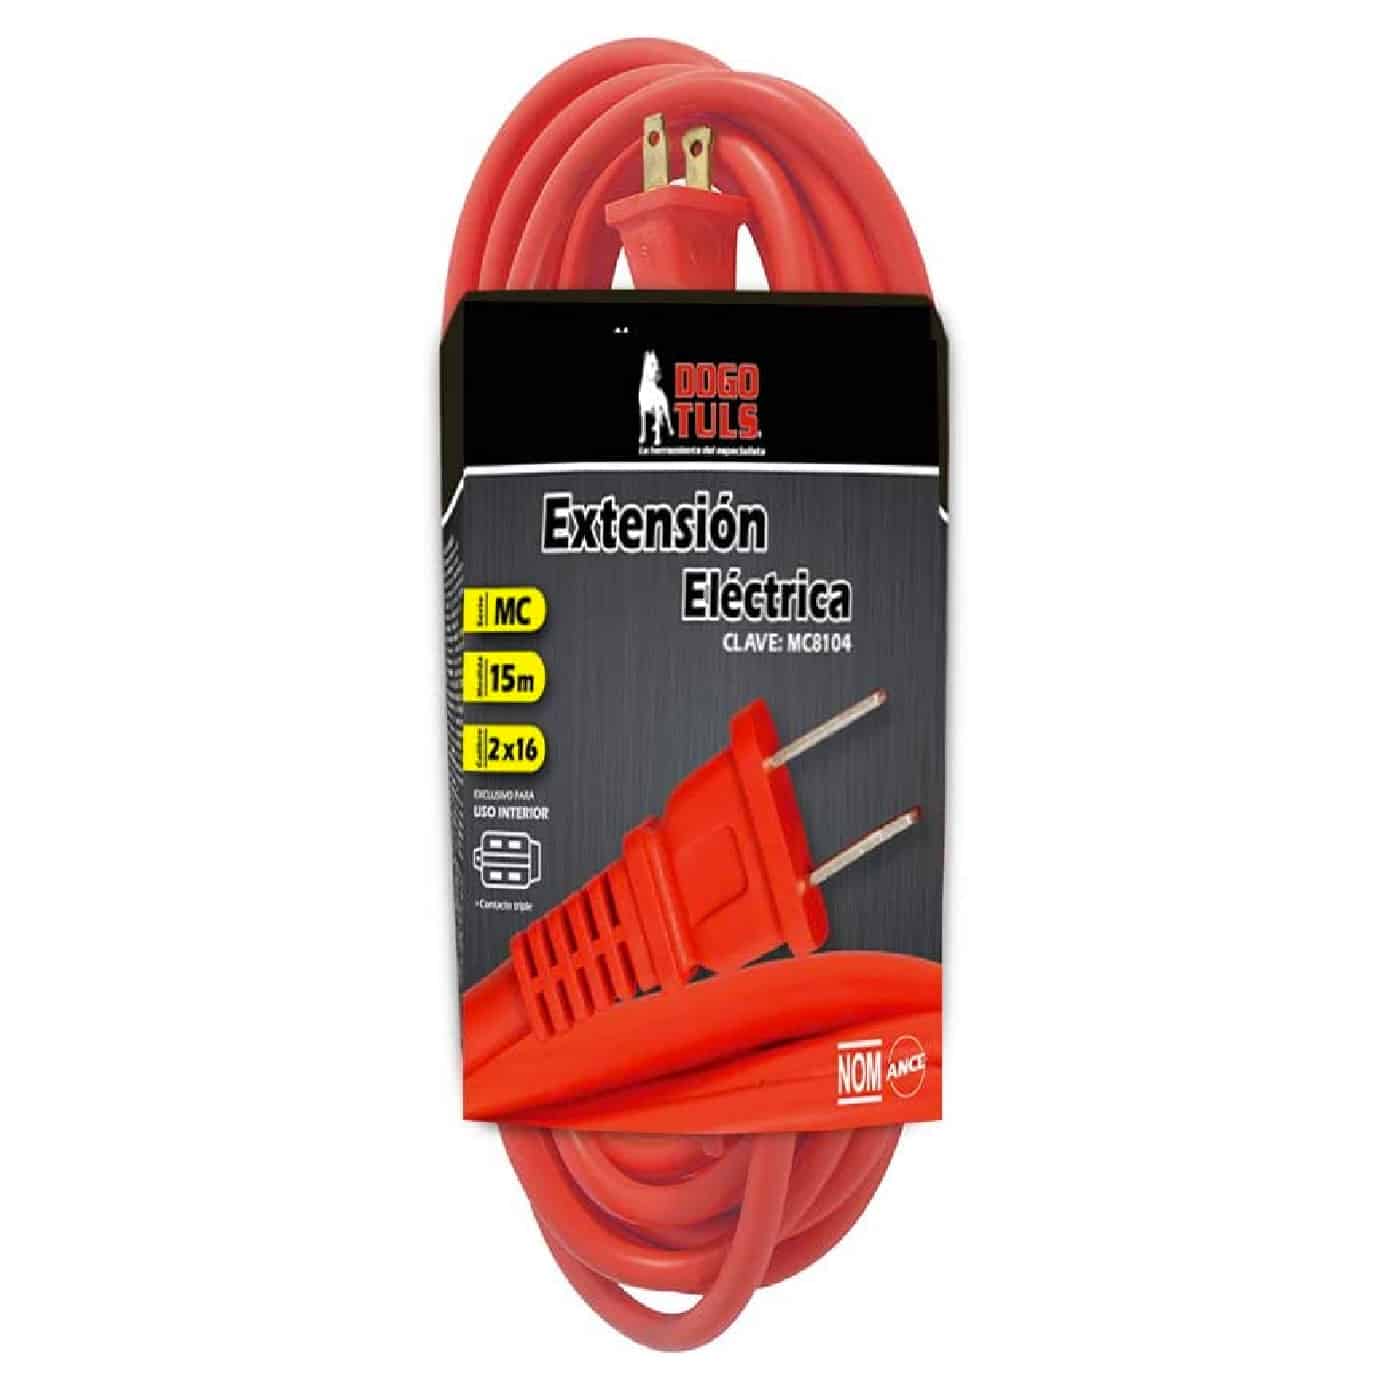 HC91610 - Extension Electrica 15 M - 2X16 AWG MC8104 - DOGOTULS